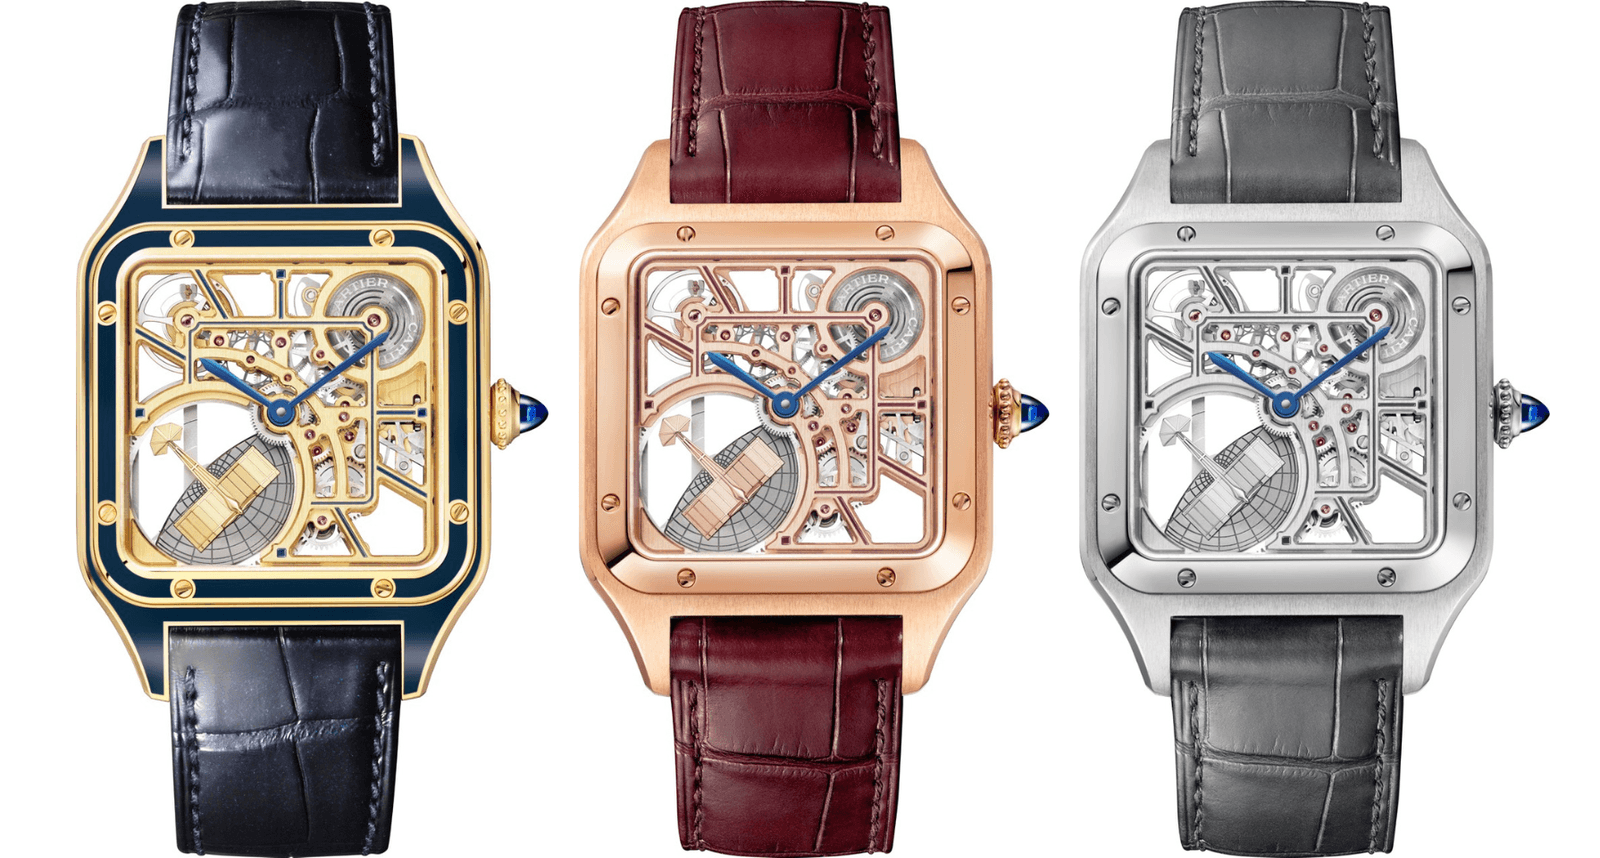 The Cartier Santos-Dumont is available in yellow gold with blue lacquer (limited edition), rose gold, and stainless steel